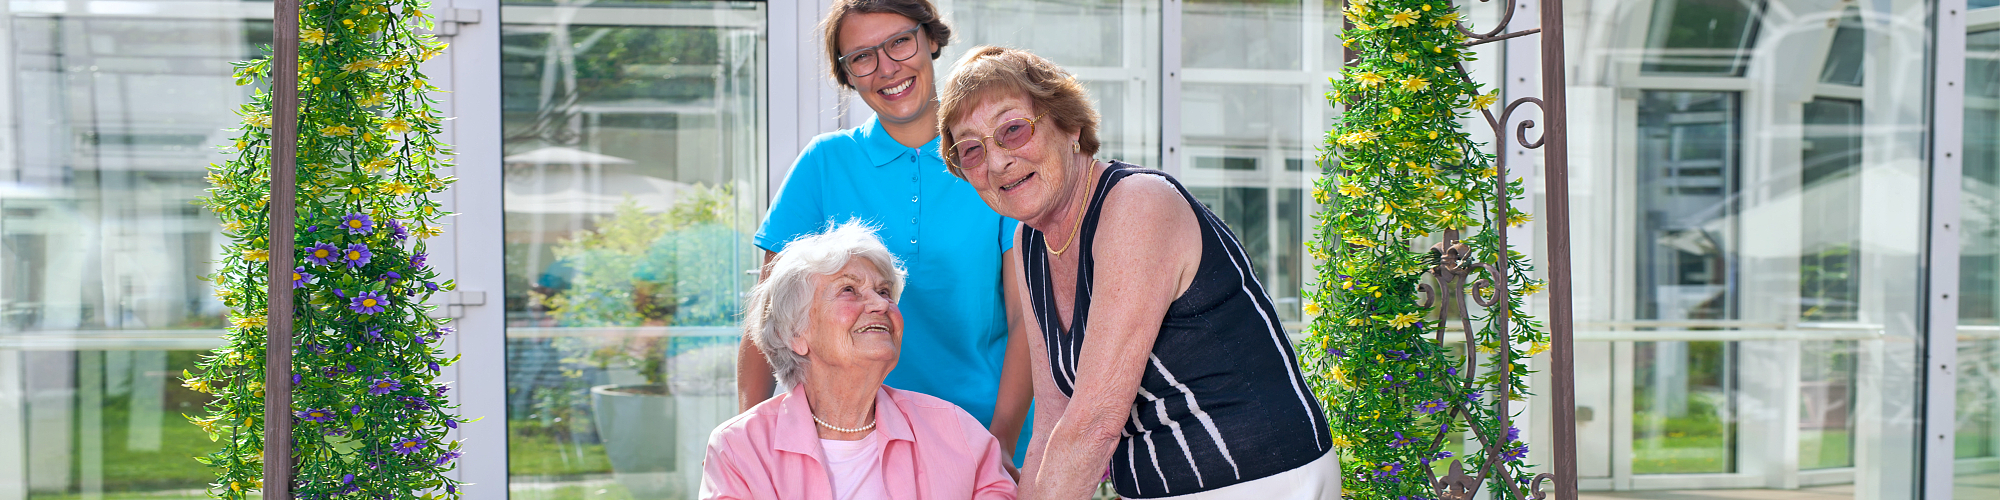 two seniors and caregiver smiling